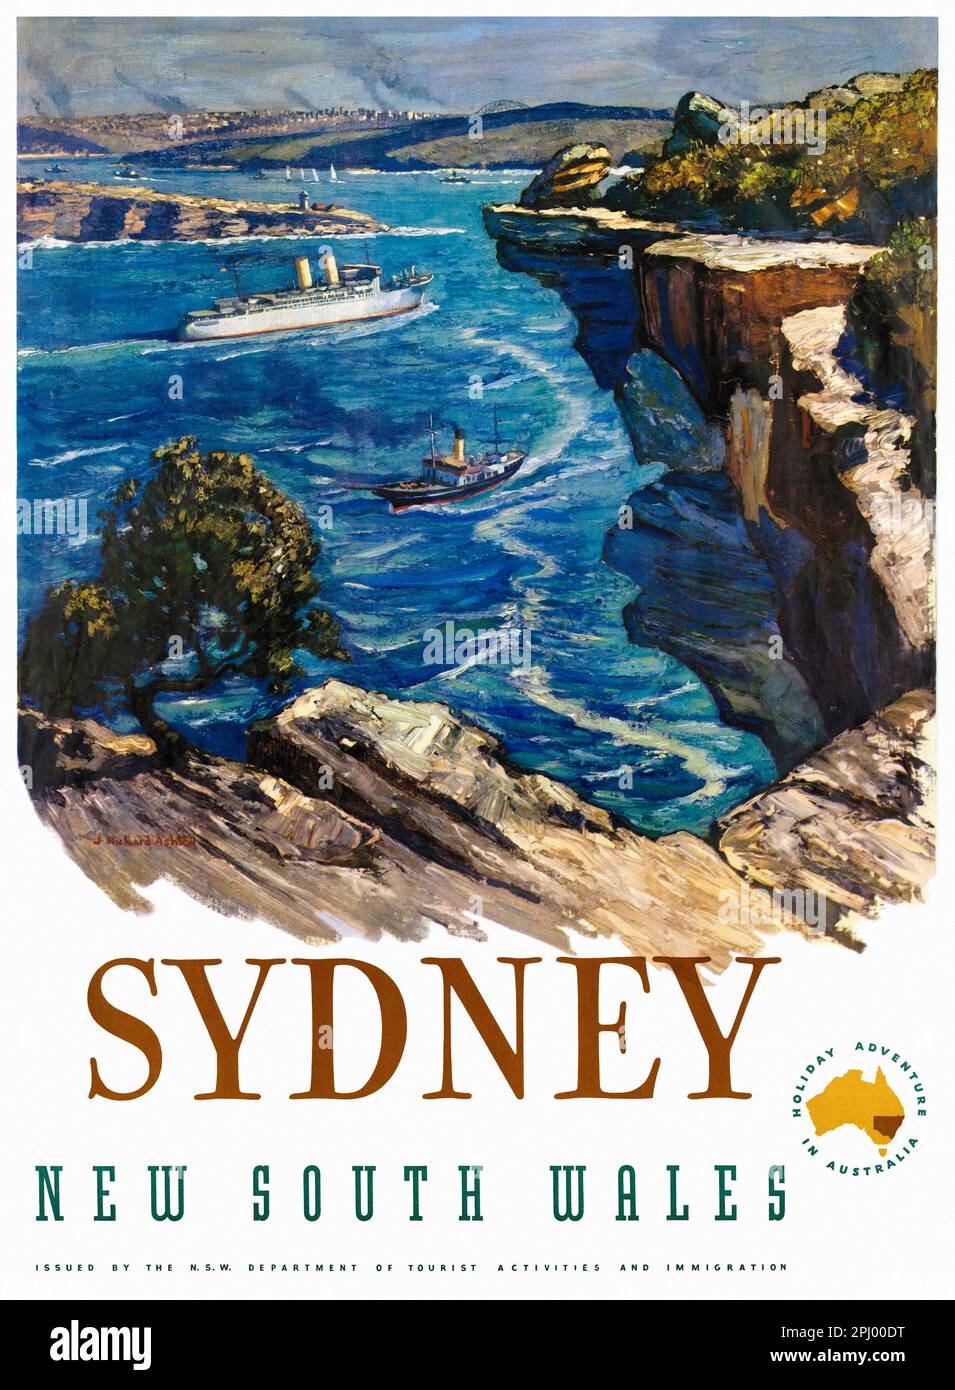 Sydney. New South Wales by Julian Richard Ashton (1913-2001). Poster published ca. 1950 in Australia. Stock Photo